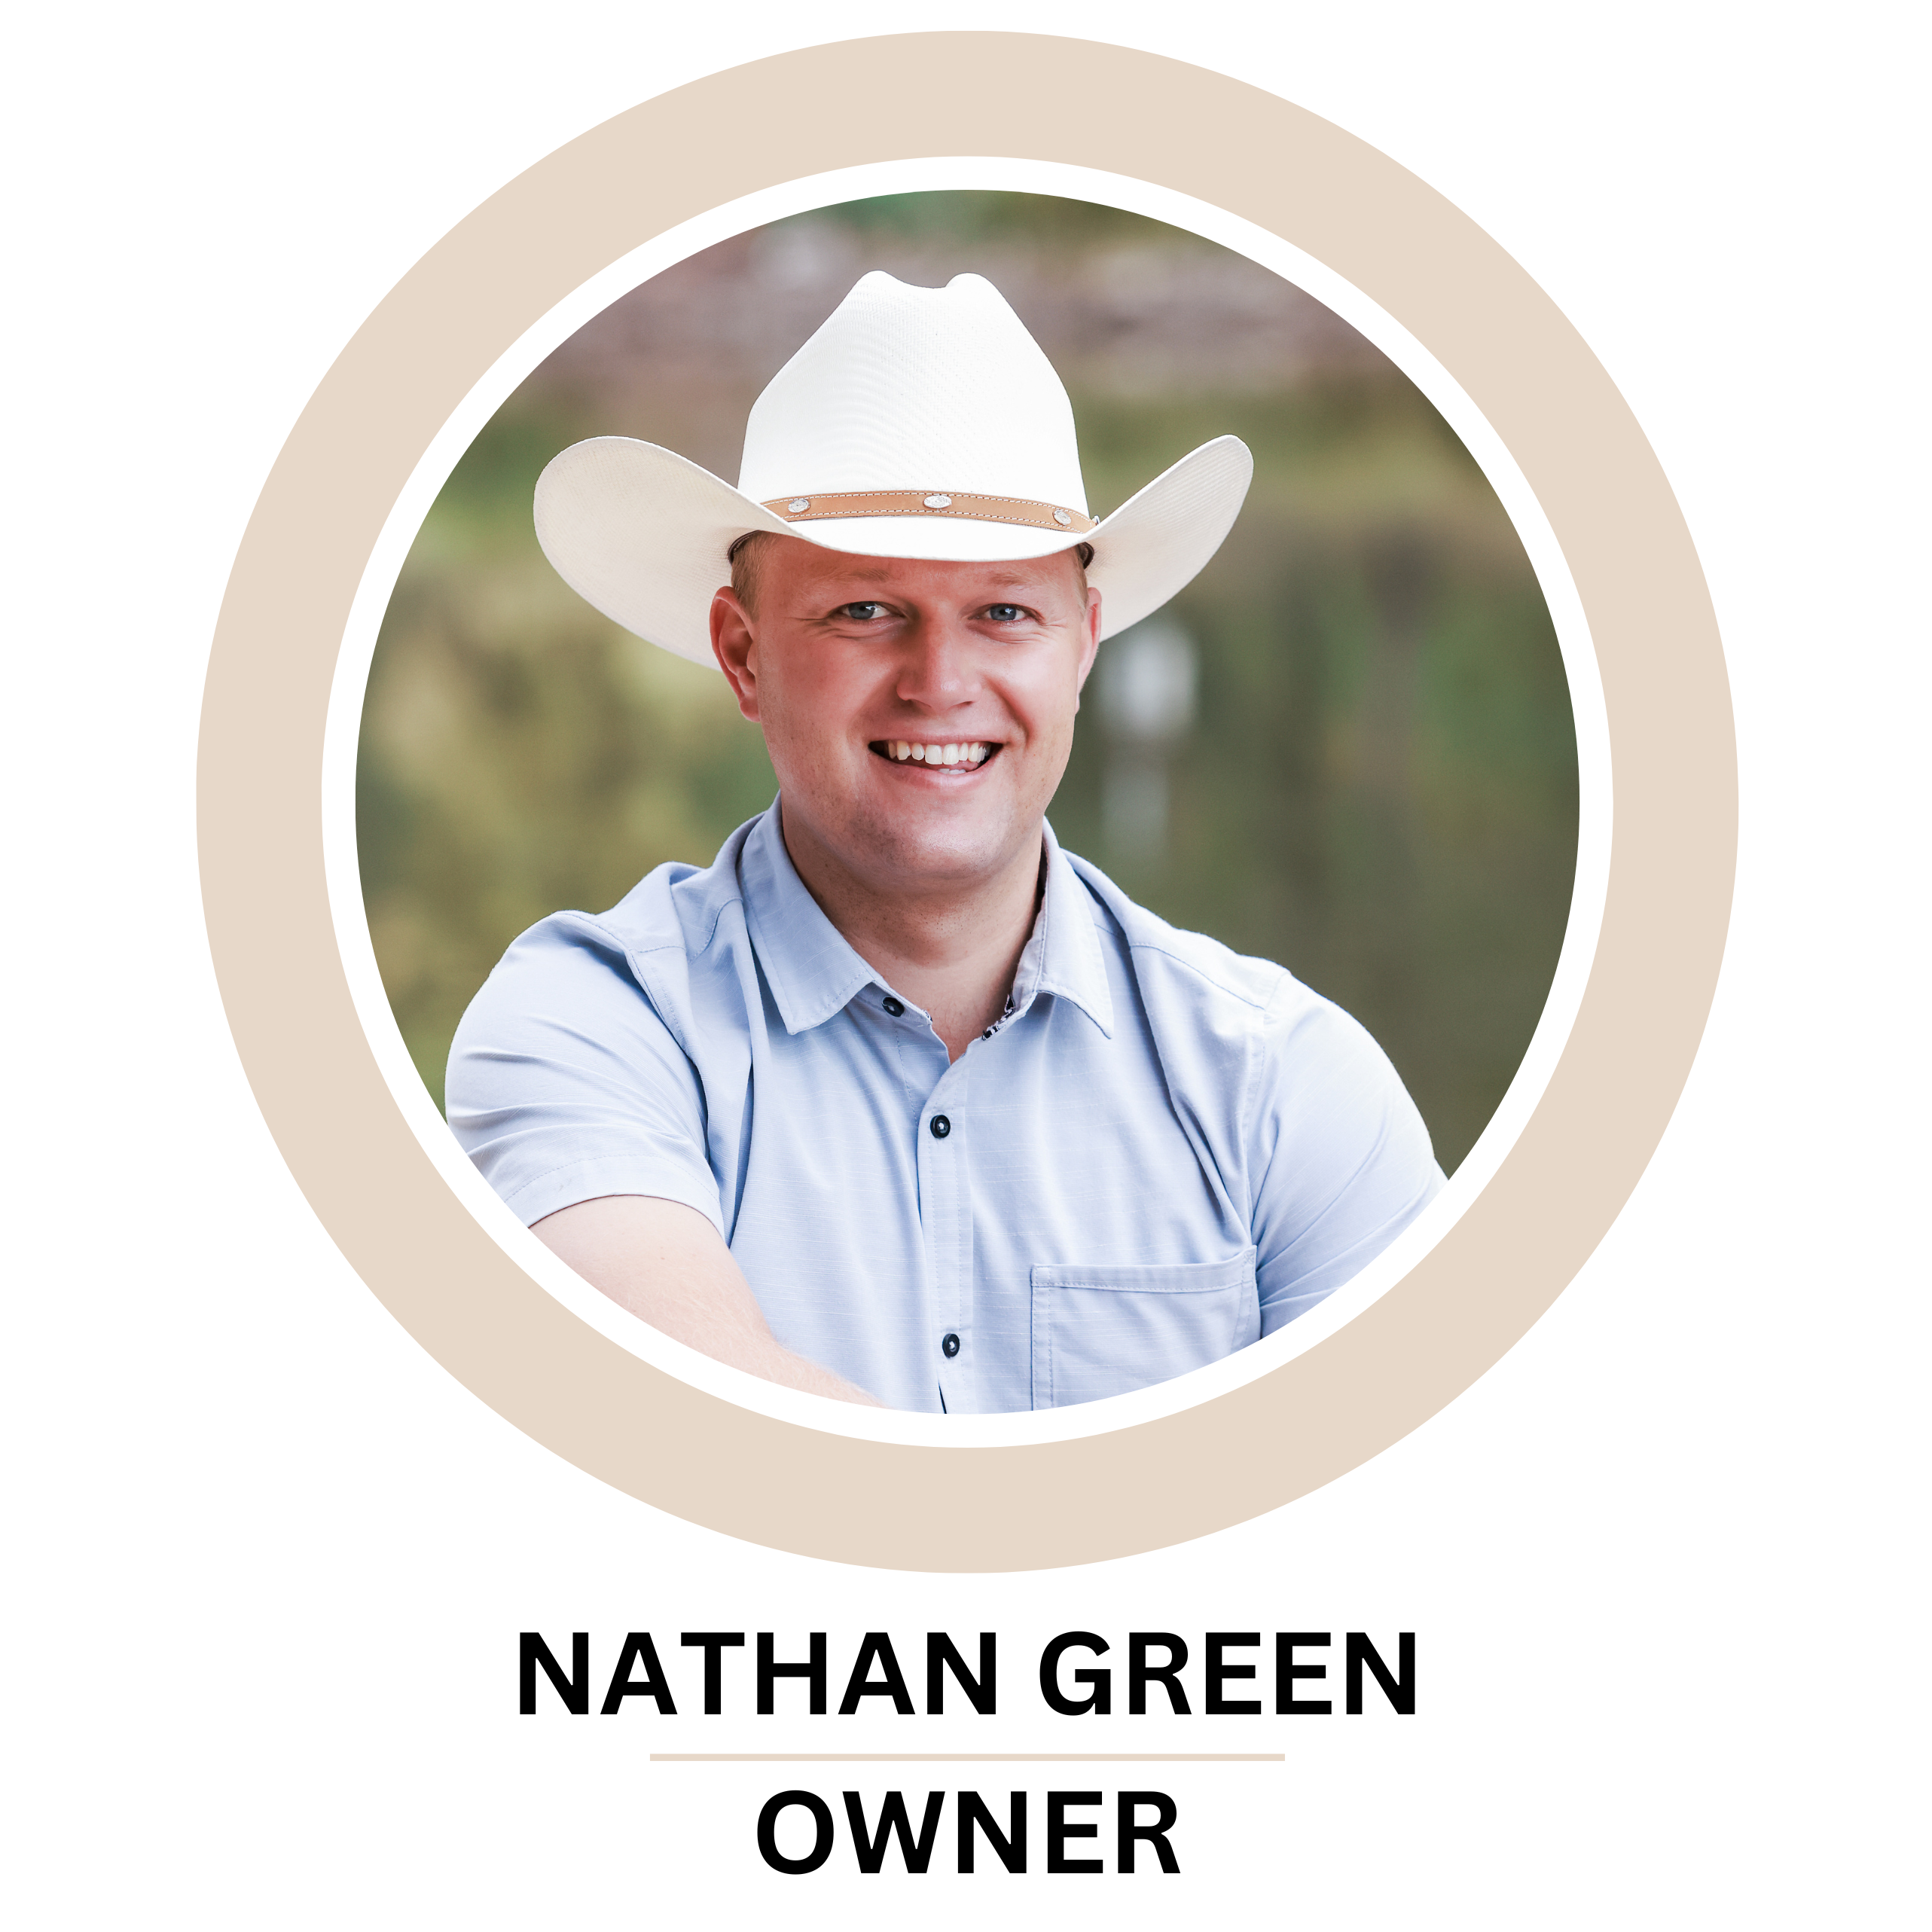 A man wearing a white cowboy hat and light blue button-up shirt is smiling. He is framed within a circular border with a muted green background, perfectly capturing the welcoming spirit of our "About Us" section.